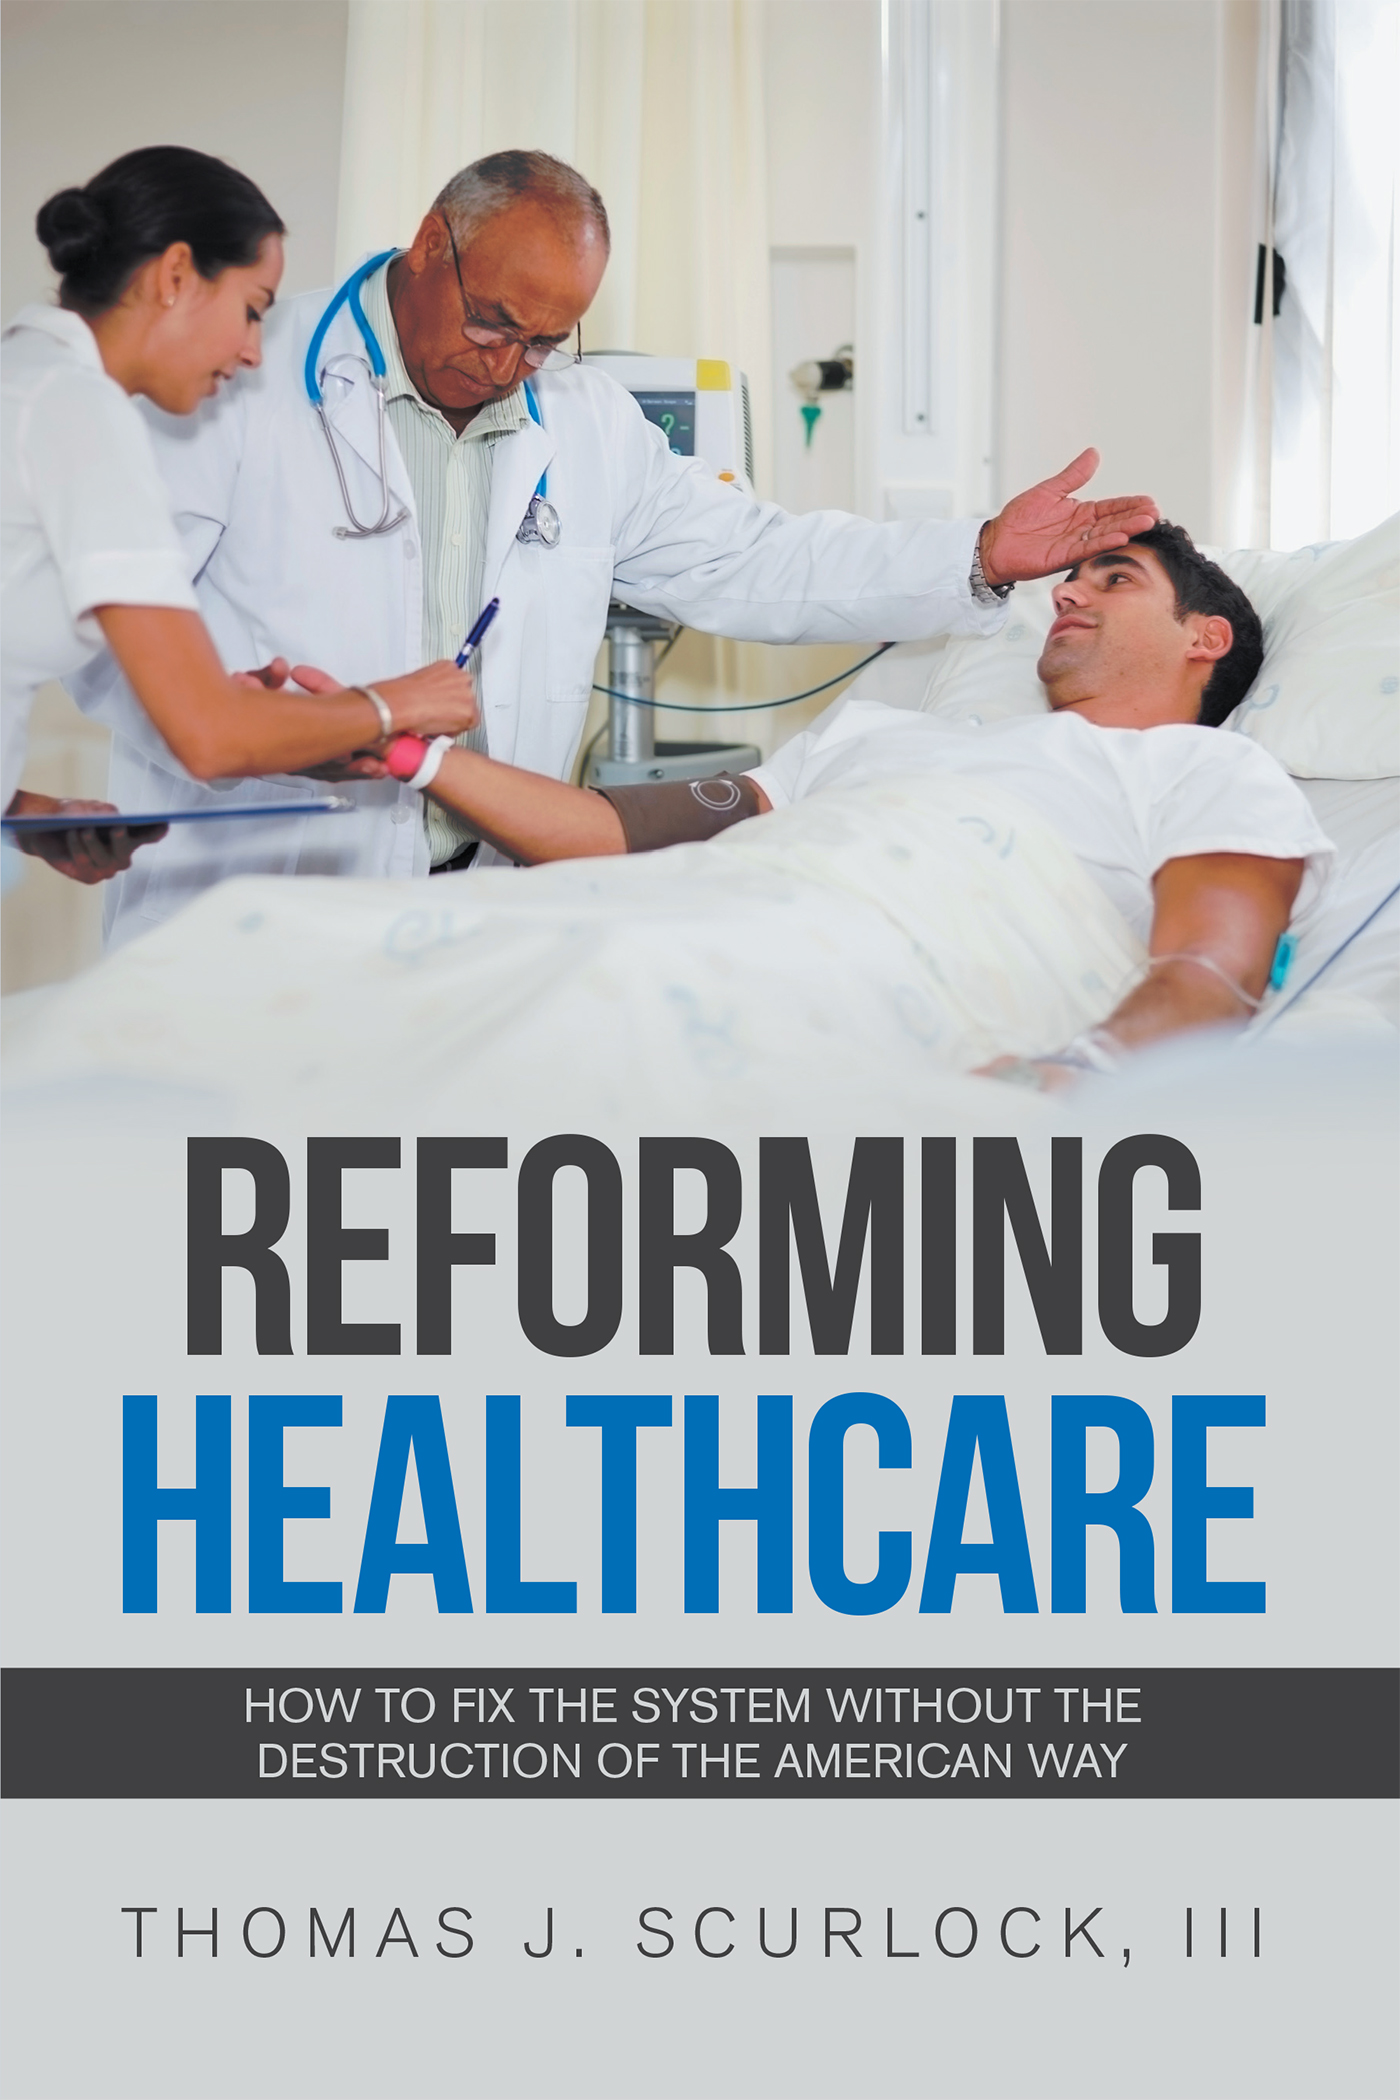 “Reforming Healthcare: How to Fix the System Without the Destruction of the American Way” by Thomas J. Scurlock, III
